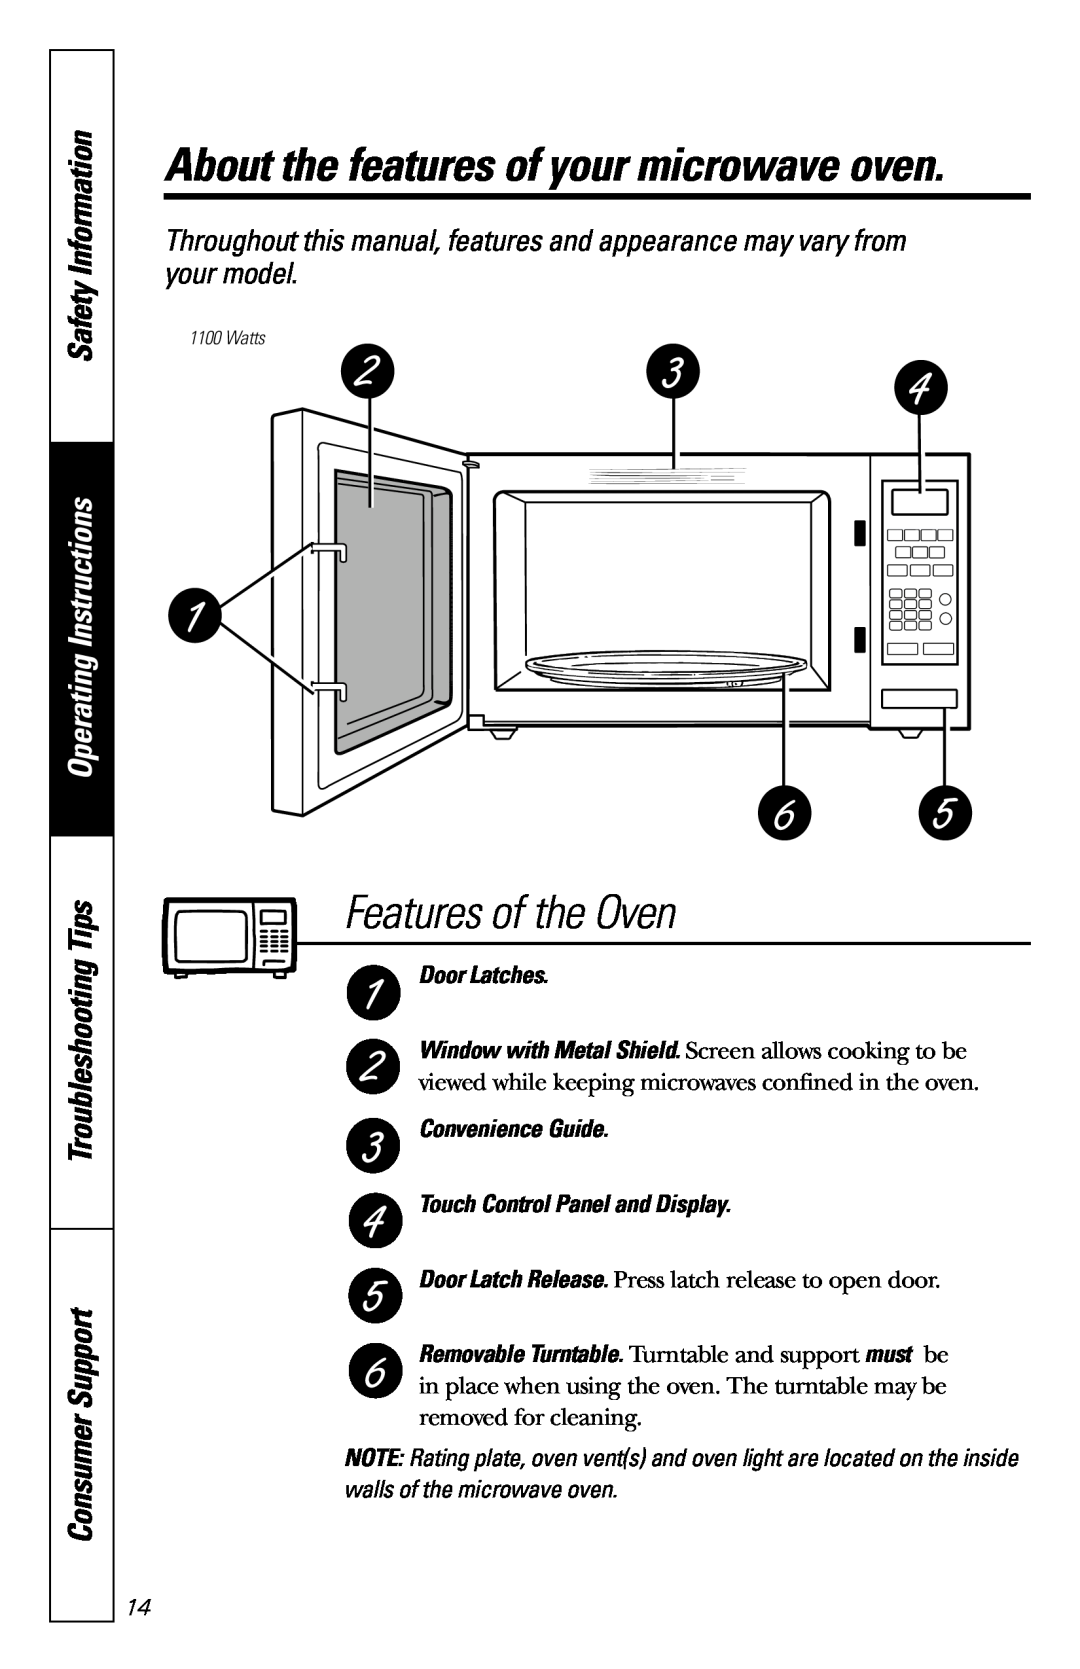 GE JES1231 Features of the Oven, Safety Information, Operating Instructions, About the features of your microwave oven 